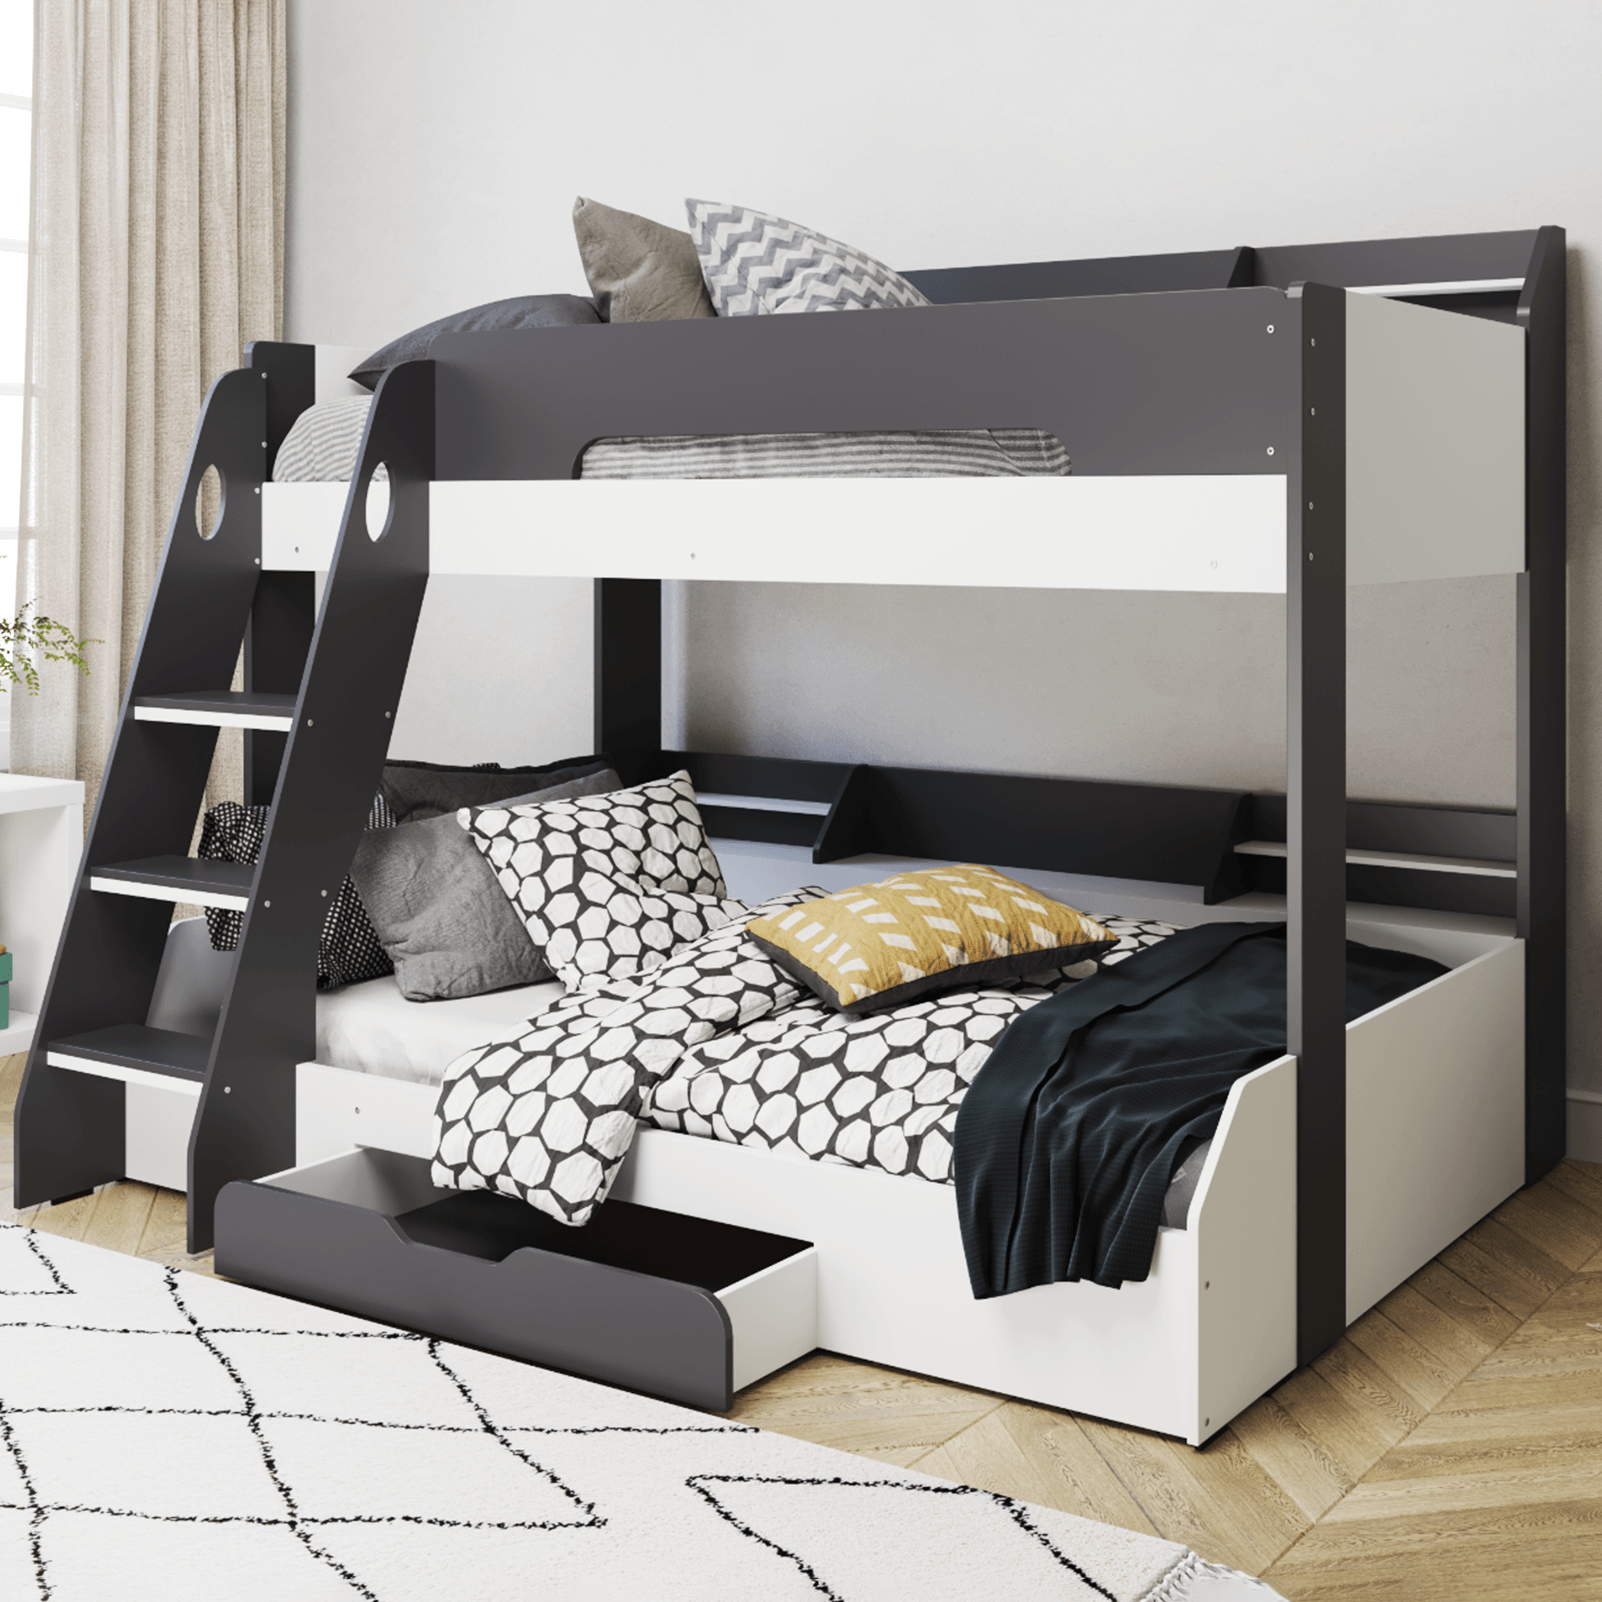 Flick Triple Bunk Bed Frame with Storage Shelves Under Bed Draw in Grey